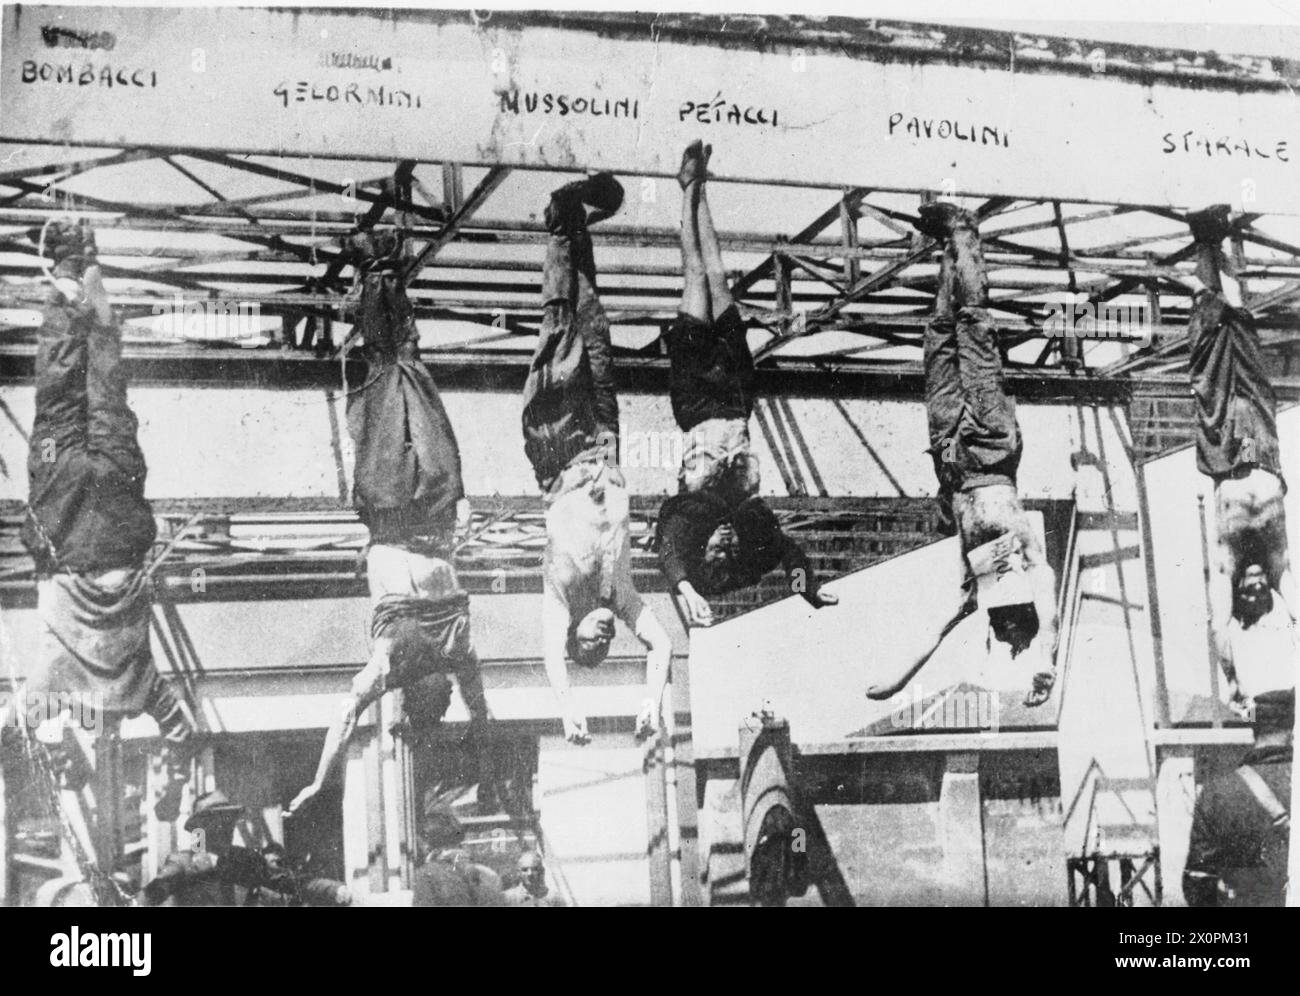 BENITO MUSSOLINI: 1883-1945 - Decline 1943 -1945: The corpses of Mussolini his mistress Clara Petacci and other fascist associates hanging by their feet in the Piazzale Loreto, Milan after being shot by communist partisans. From left to right Bombacci, Gelormini, Mussolini, Petacci, Pavolini and Starace Mussolini, Benito Amilcare Andrea Stock Photo